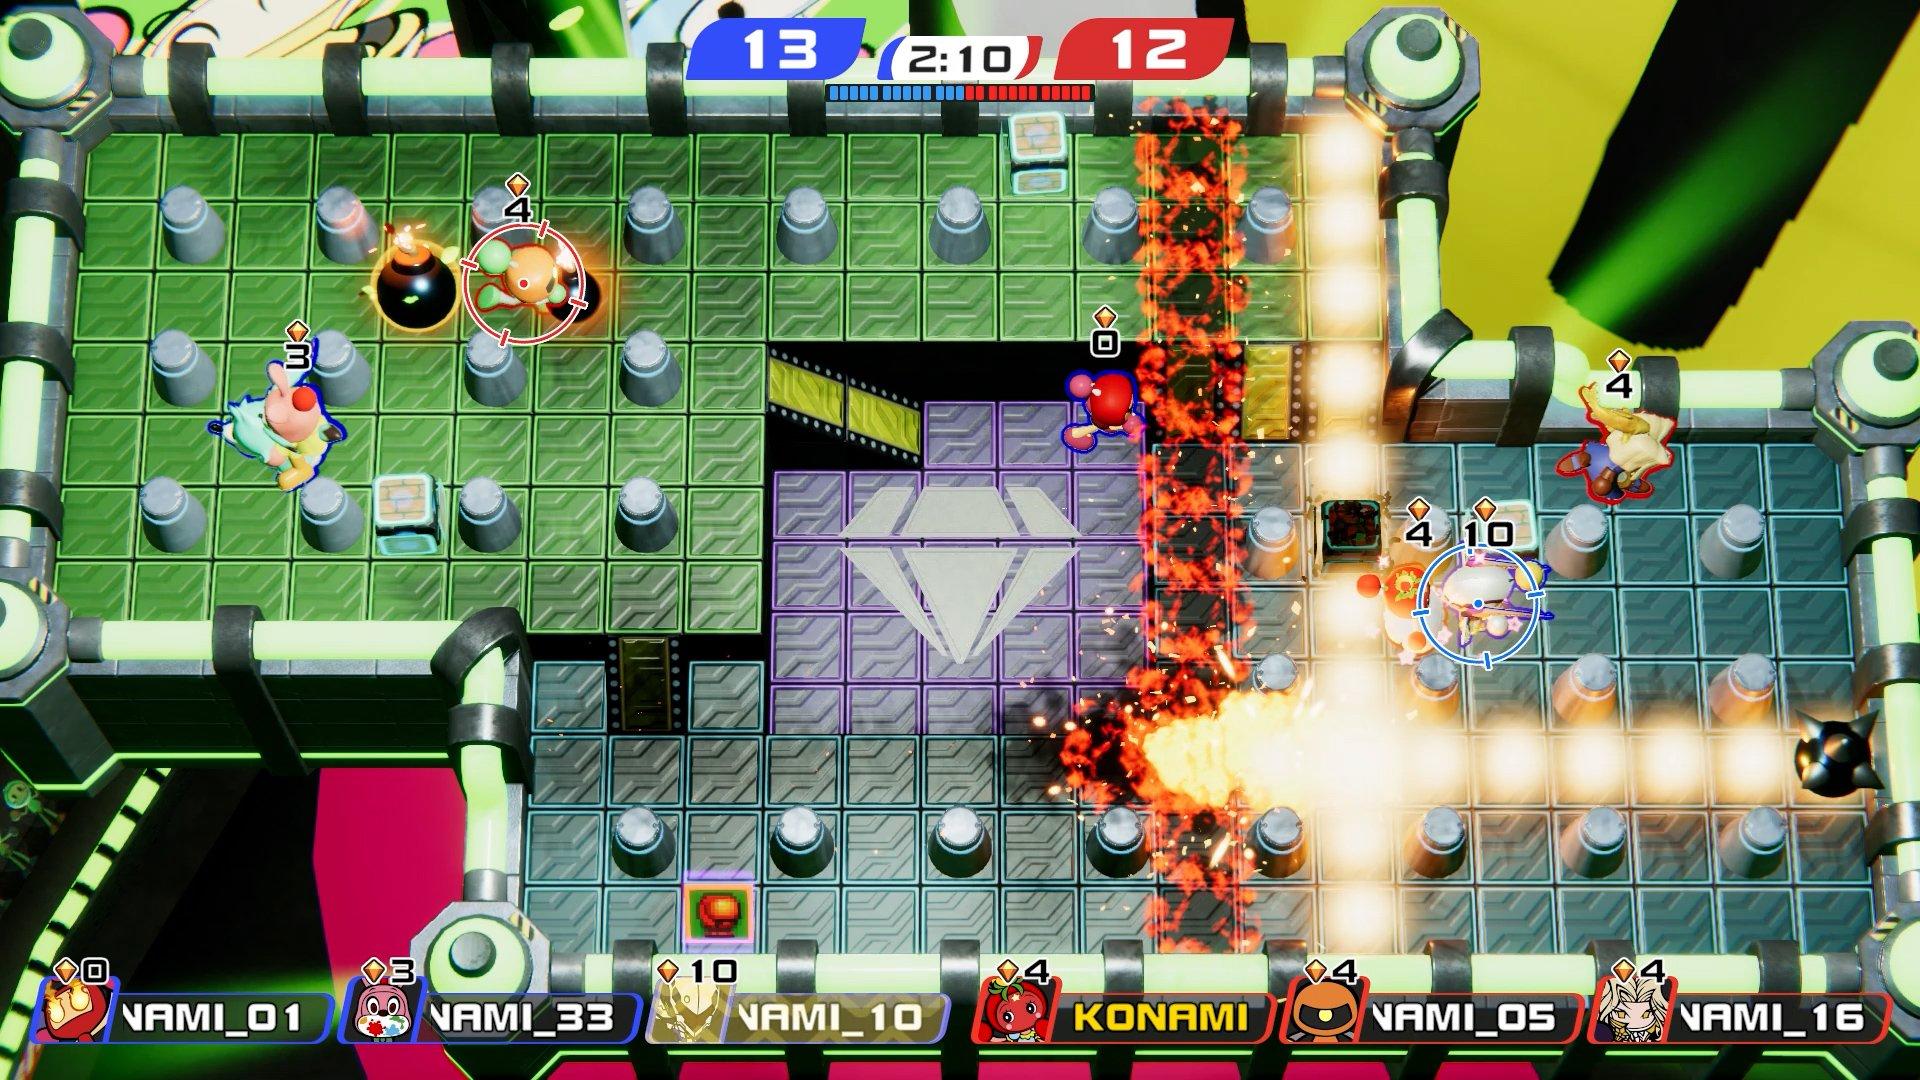 Super Bomberman R Might Be Getting a PS4 Port Soon